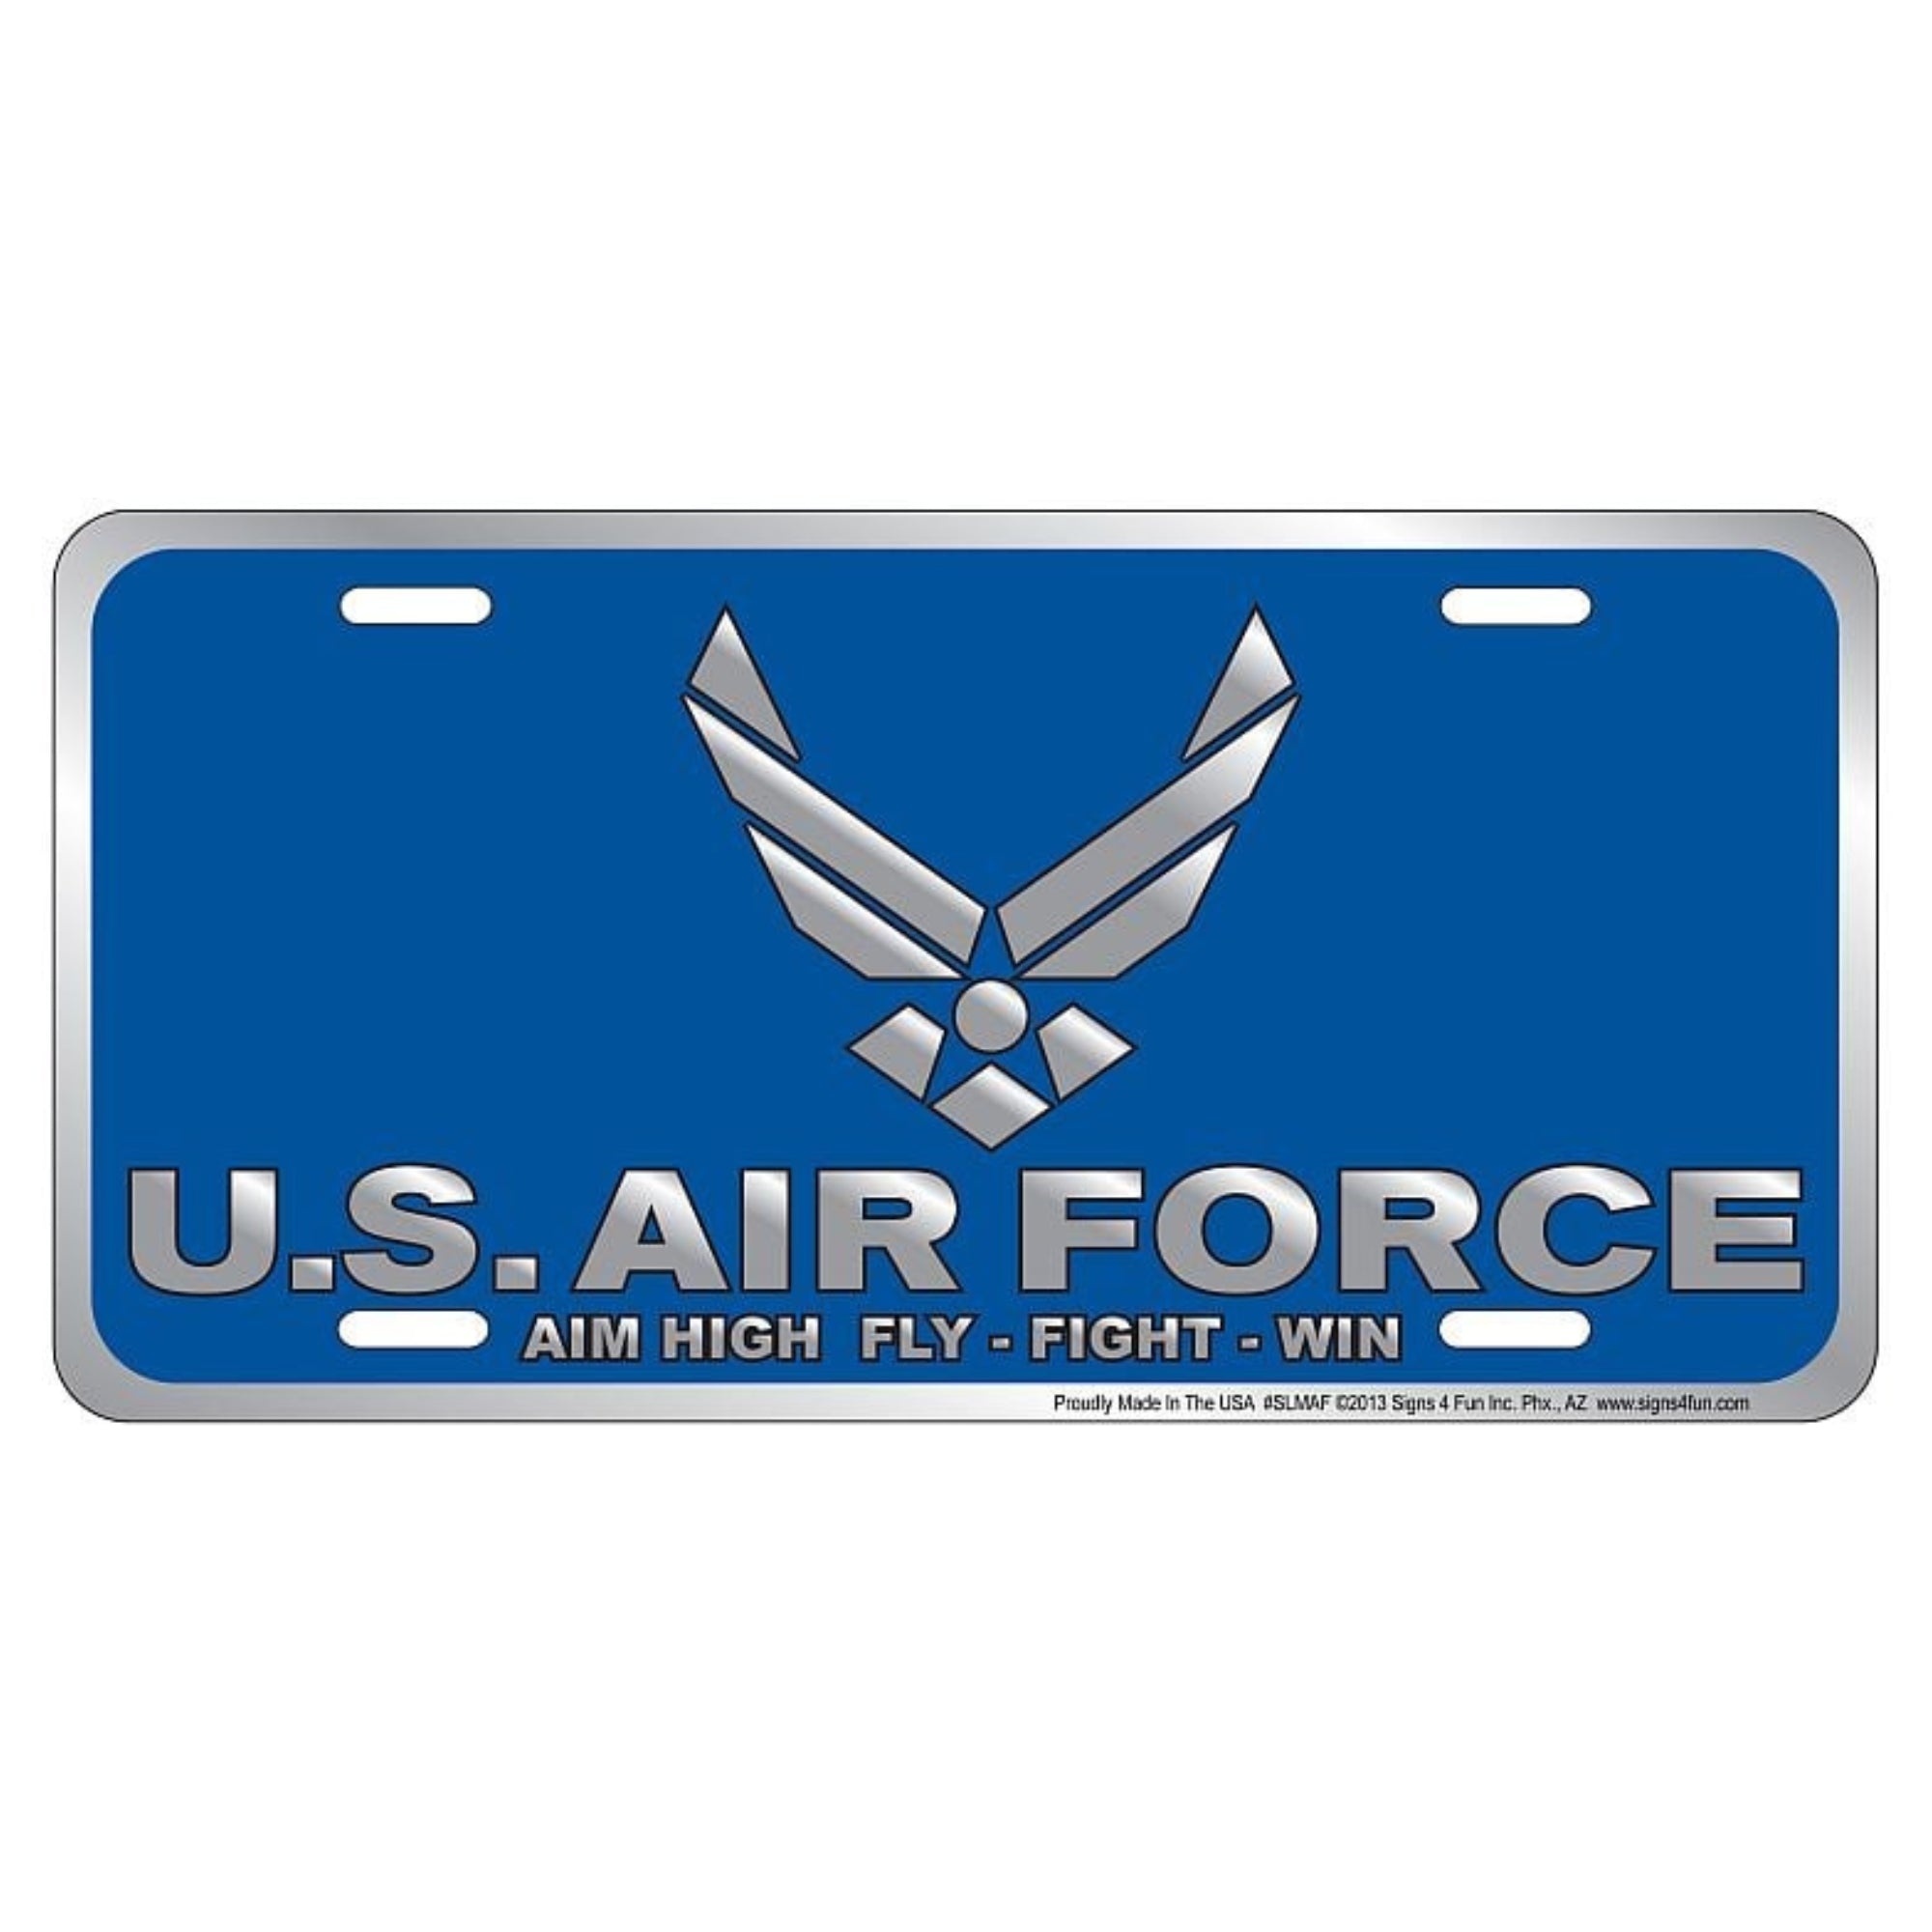 Air Force Aim High Fly Fight Win License Plate